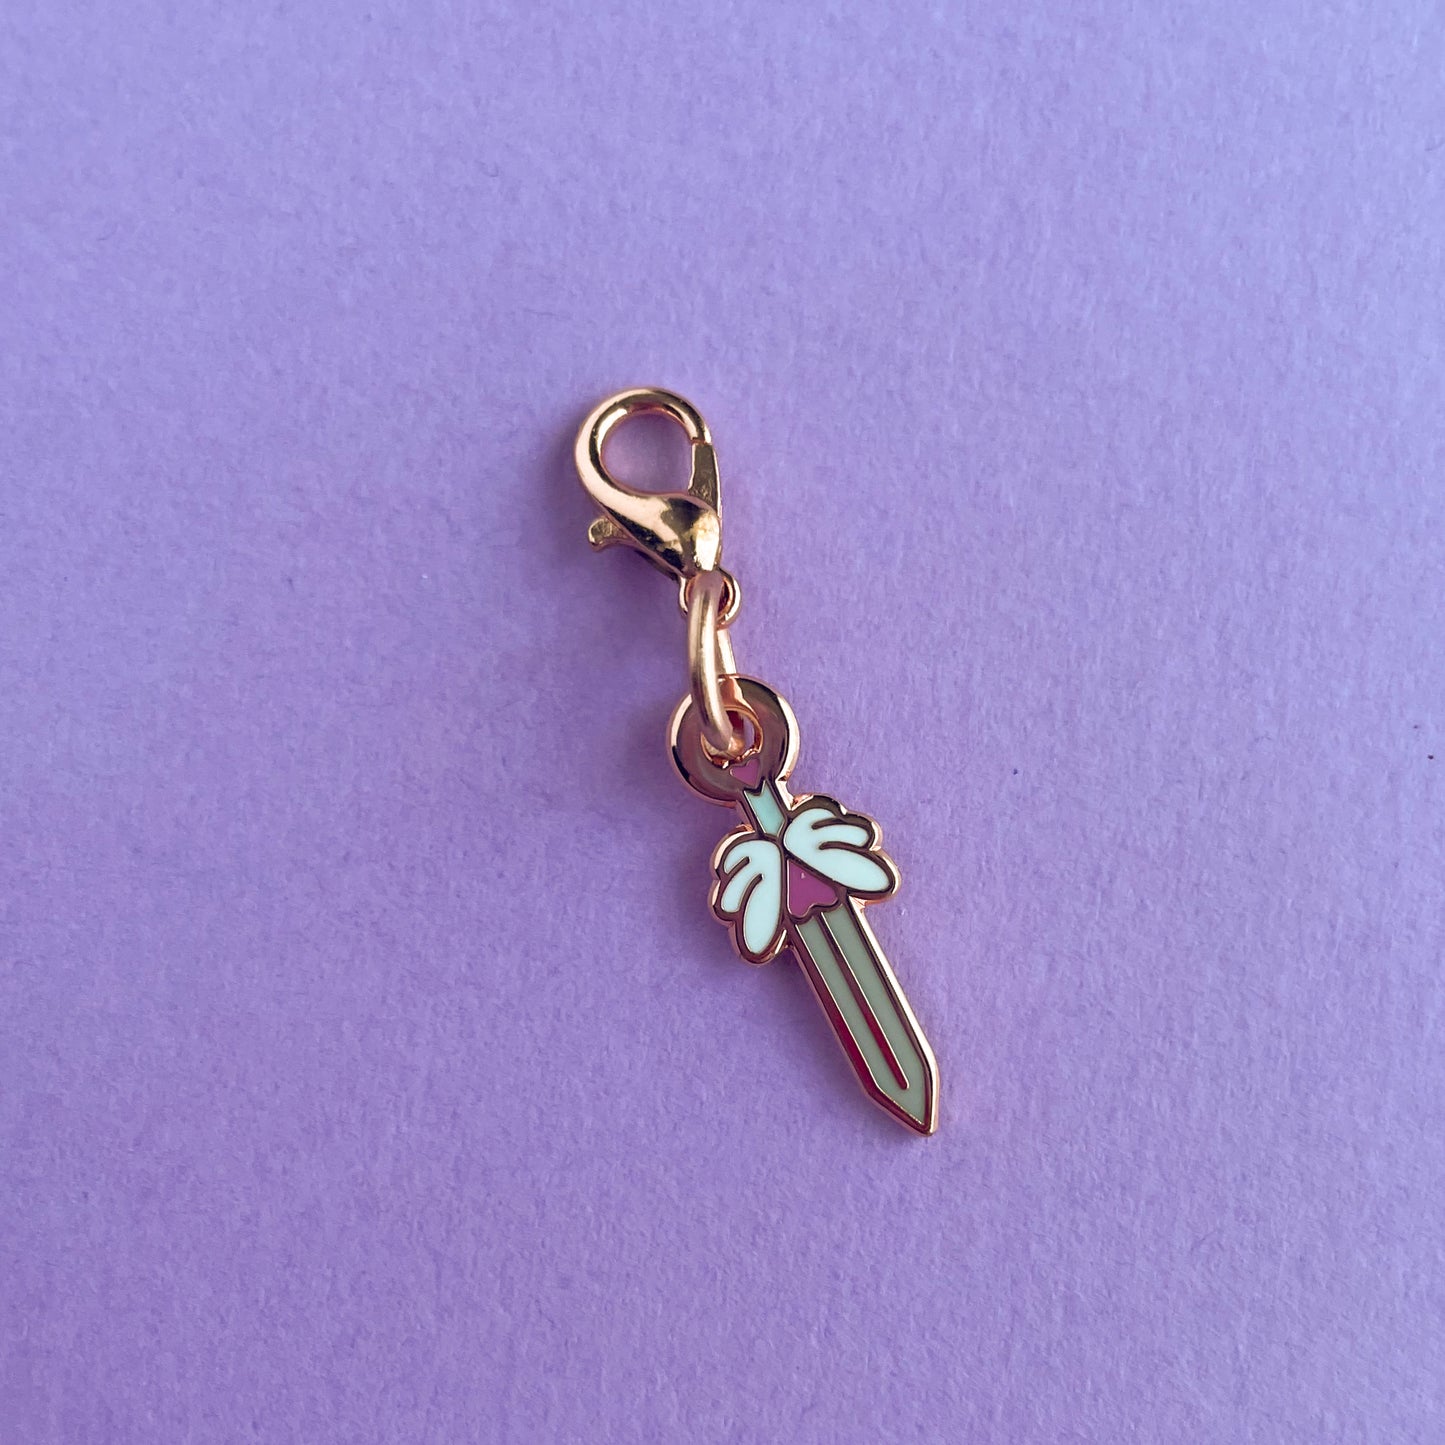 A charm with a lobster claw clasp in rose gold metal. The charm is shaped like a sword with heart and winged hilt. The charm is on a lavender background.